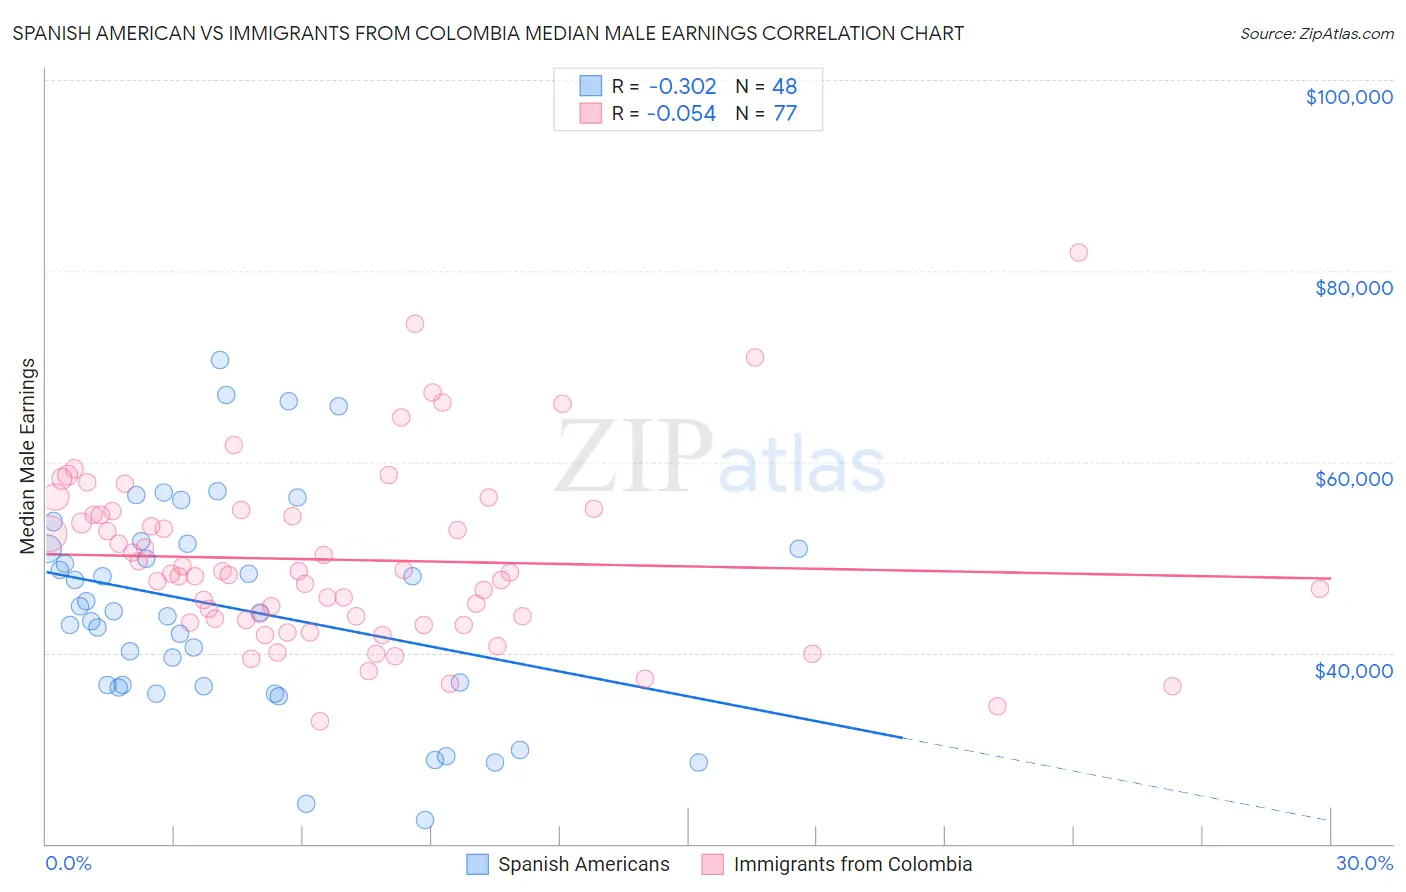 Spanish American vs Immigrants from Colombia Median Male Earnings